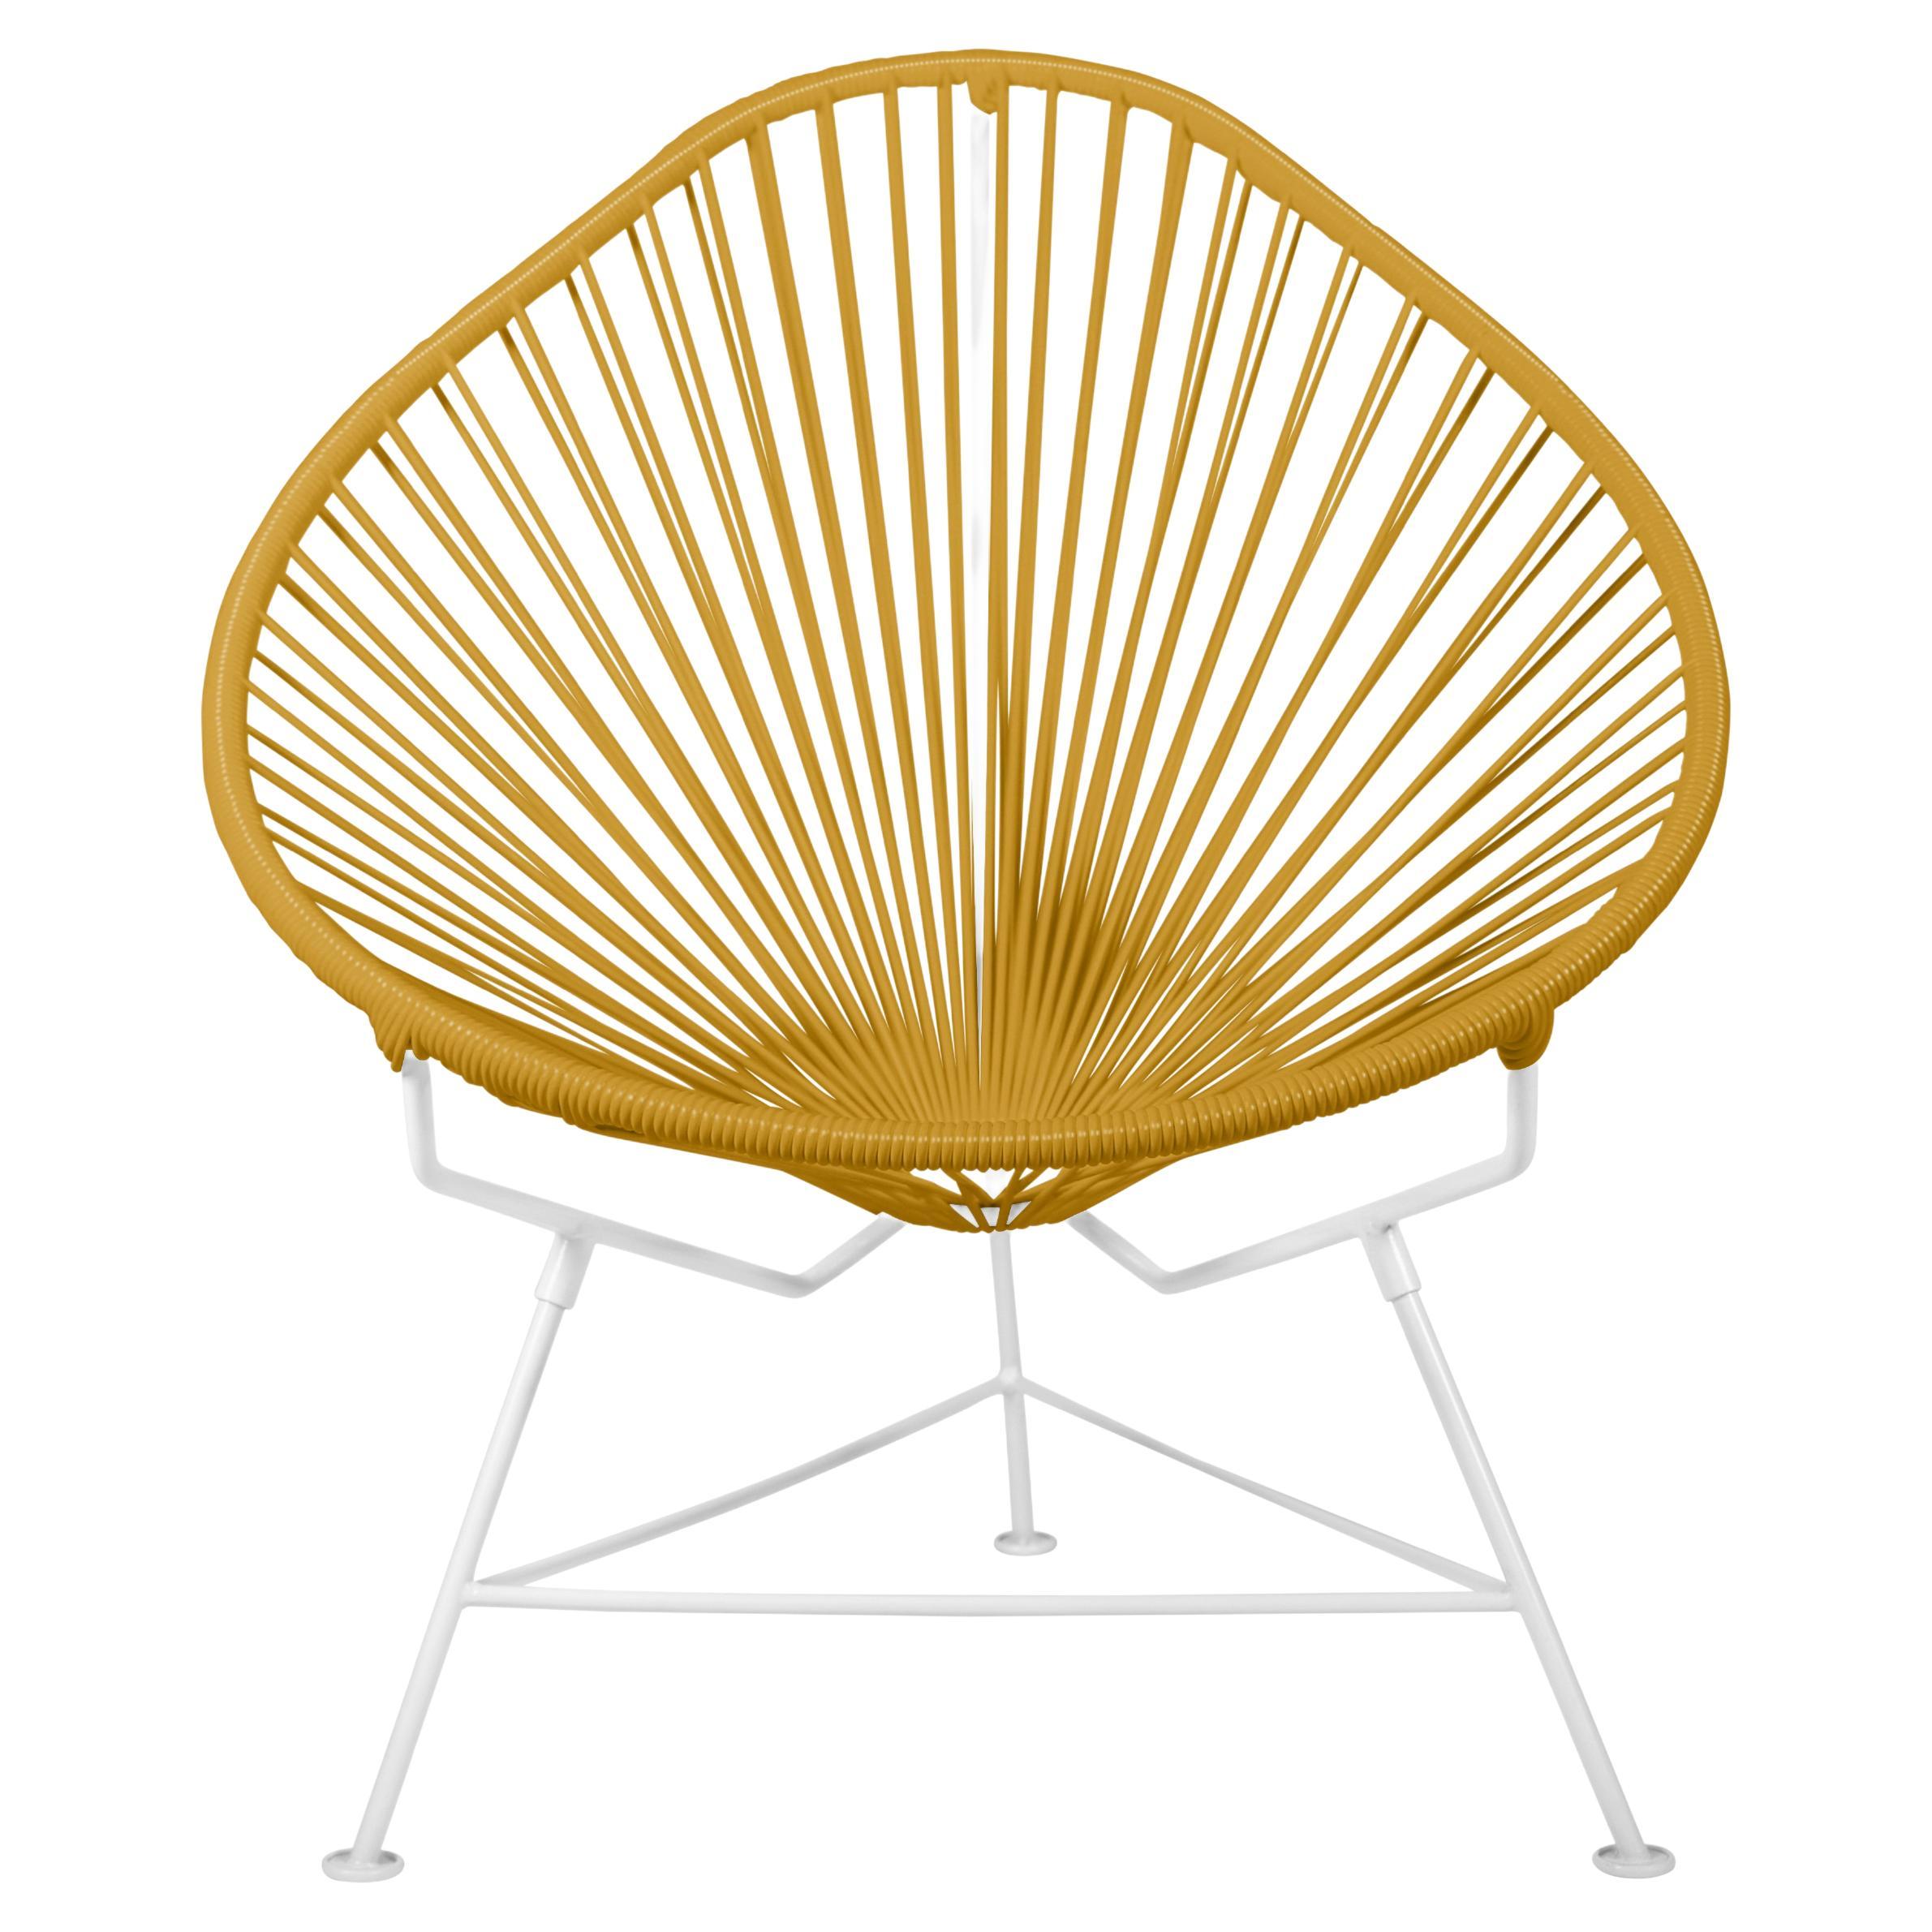 Innit Designs Acapulco Chair Caramel Weave on White Frame